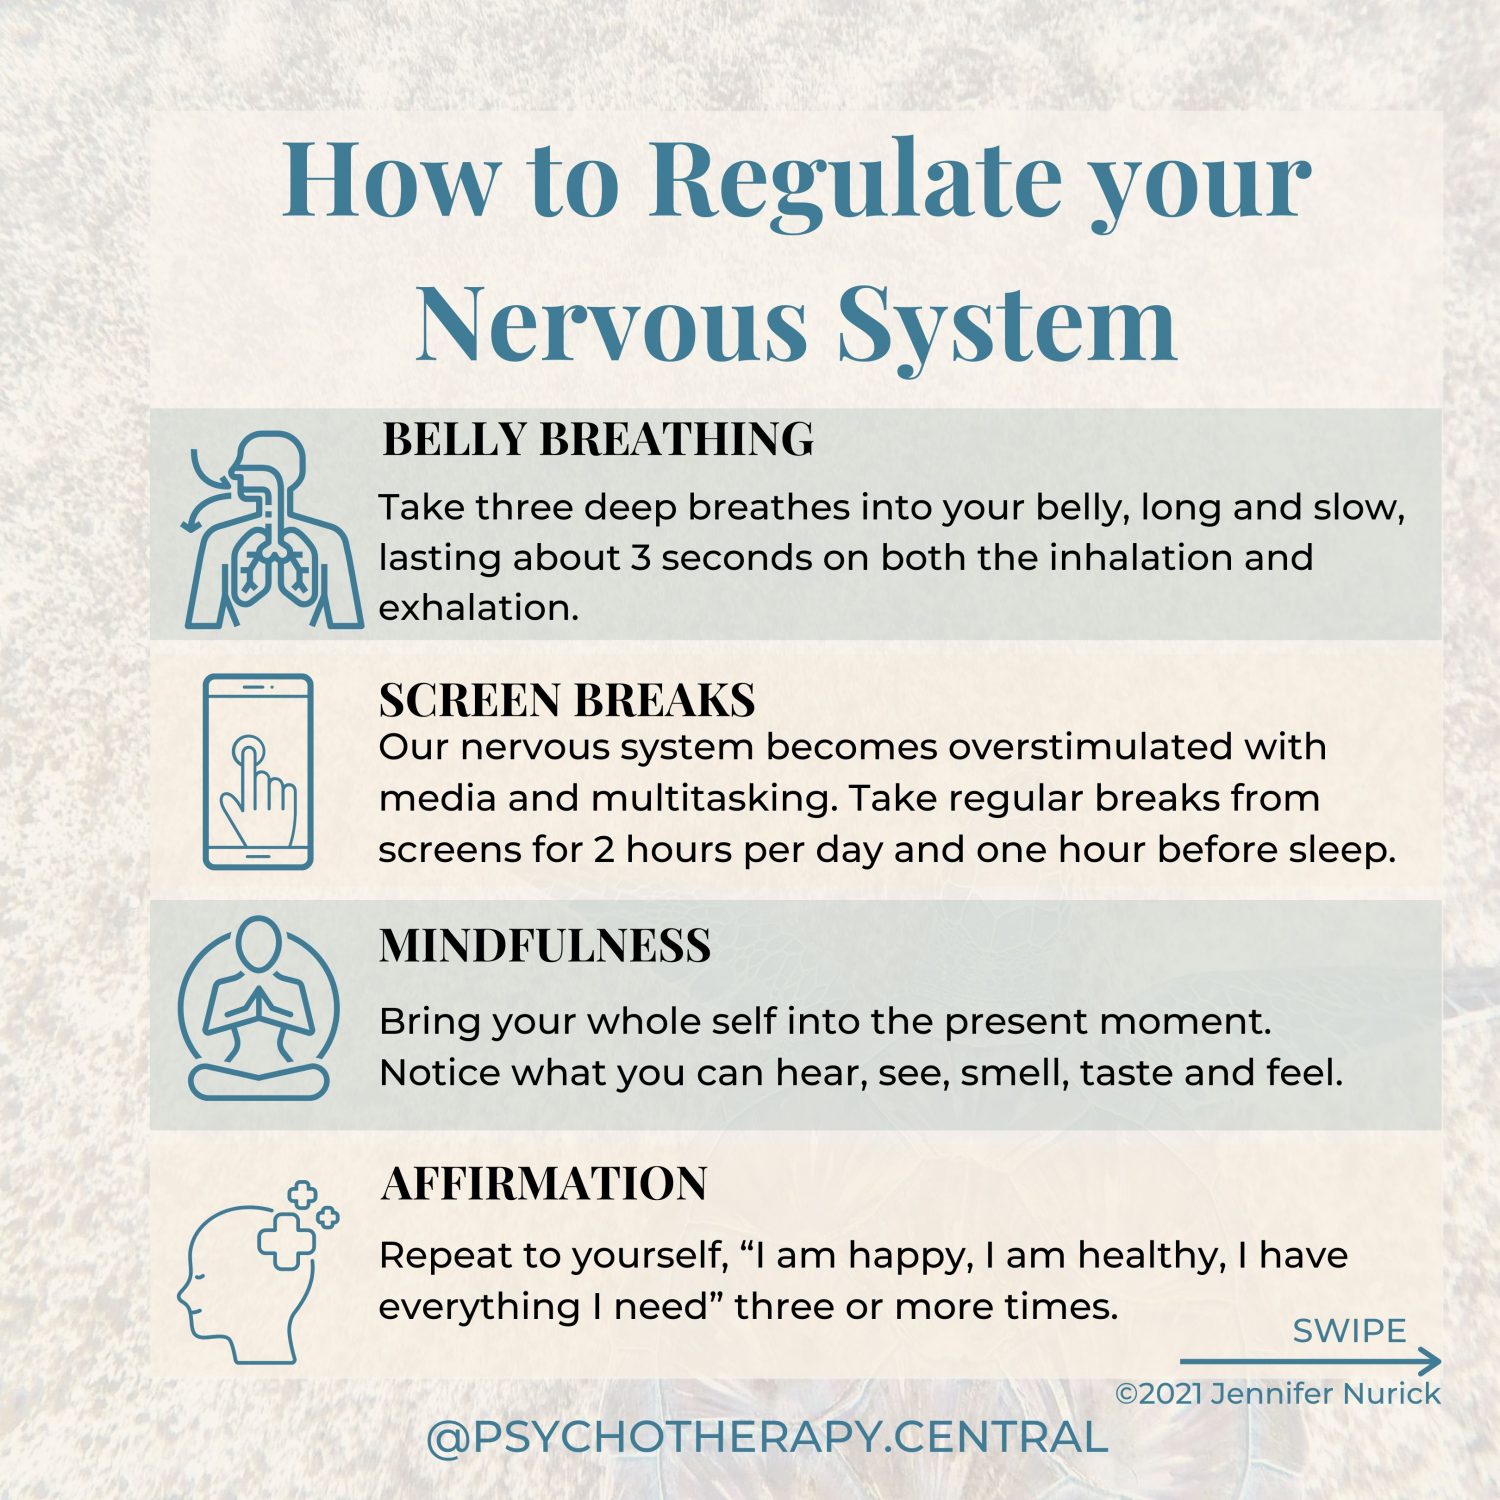 How to Regulate your Nervous System BELLY BREATHING – Take three deep breathes into your belly, long and slow, lasting about 3 seconds on both the inhalation and exhalation. SCREEN BREAK – Our nervous system becomes overstimulated with media and multitasking. Take regular breaks from screens, perhaps for 2 hours per day and one hour before sleep. MINDFULNESS – Bring your whole self into the present moment. Notice what you can hear, see, smell, taste and feel. AFFIRMATION – Repeat to yourself, “I am happy, I am healthy, I have everything I need” three or more times. INNER CHILD – Take time to connect with your Inner Child and talk to them. Find out how they are and what they need to feel safe and calm. NATURE AND SUNSHINE – Nature is a natural regulator, go somewhere in nature and notice everything around you, the colours, sounds, and feelings. Imagine you can begin to breathe with nature in this place—breath in the serotonin-producing sunshine. CO-REGULATION – Regulating your nervous system with someone else. You can do this by sharing with someone you love and enjoying something together. MAKE TIME FOR JOY – Do something you love; gardening, baking, painting, reading, singing or dancing. This tells your nervous system that you are safe.